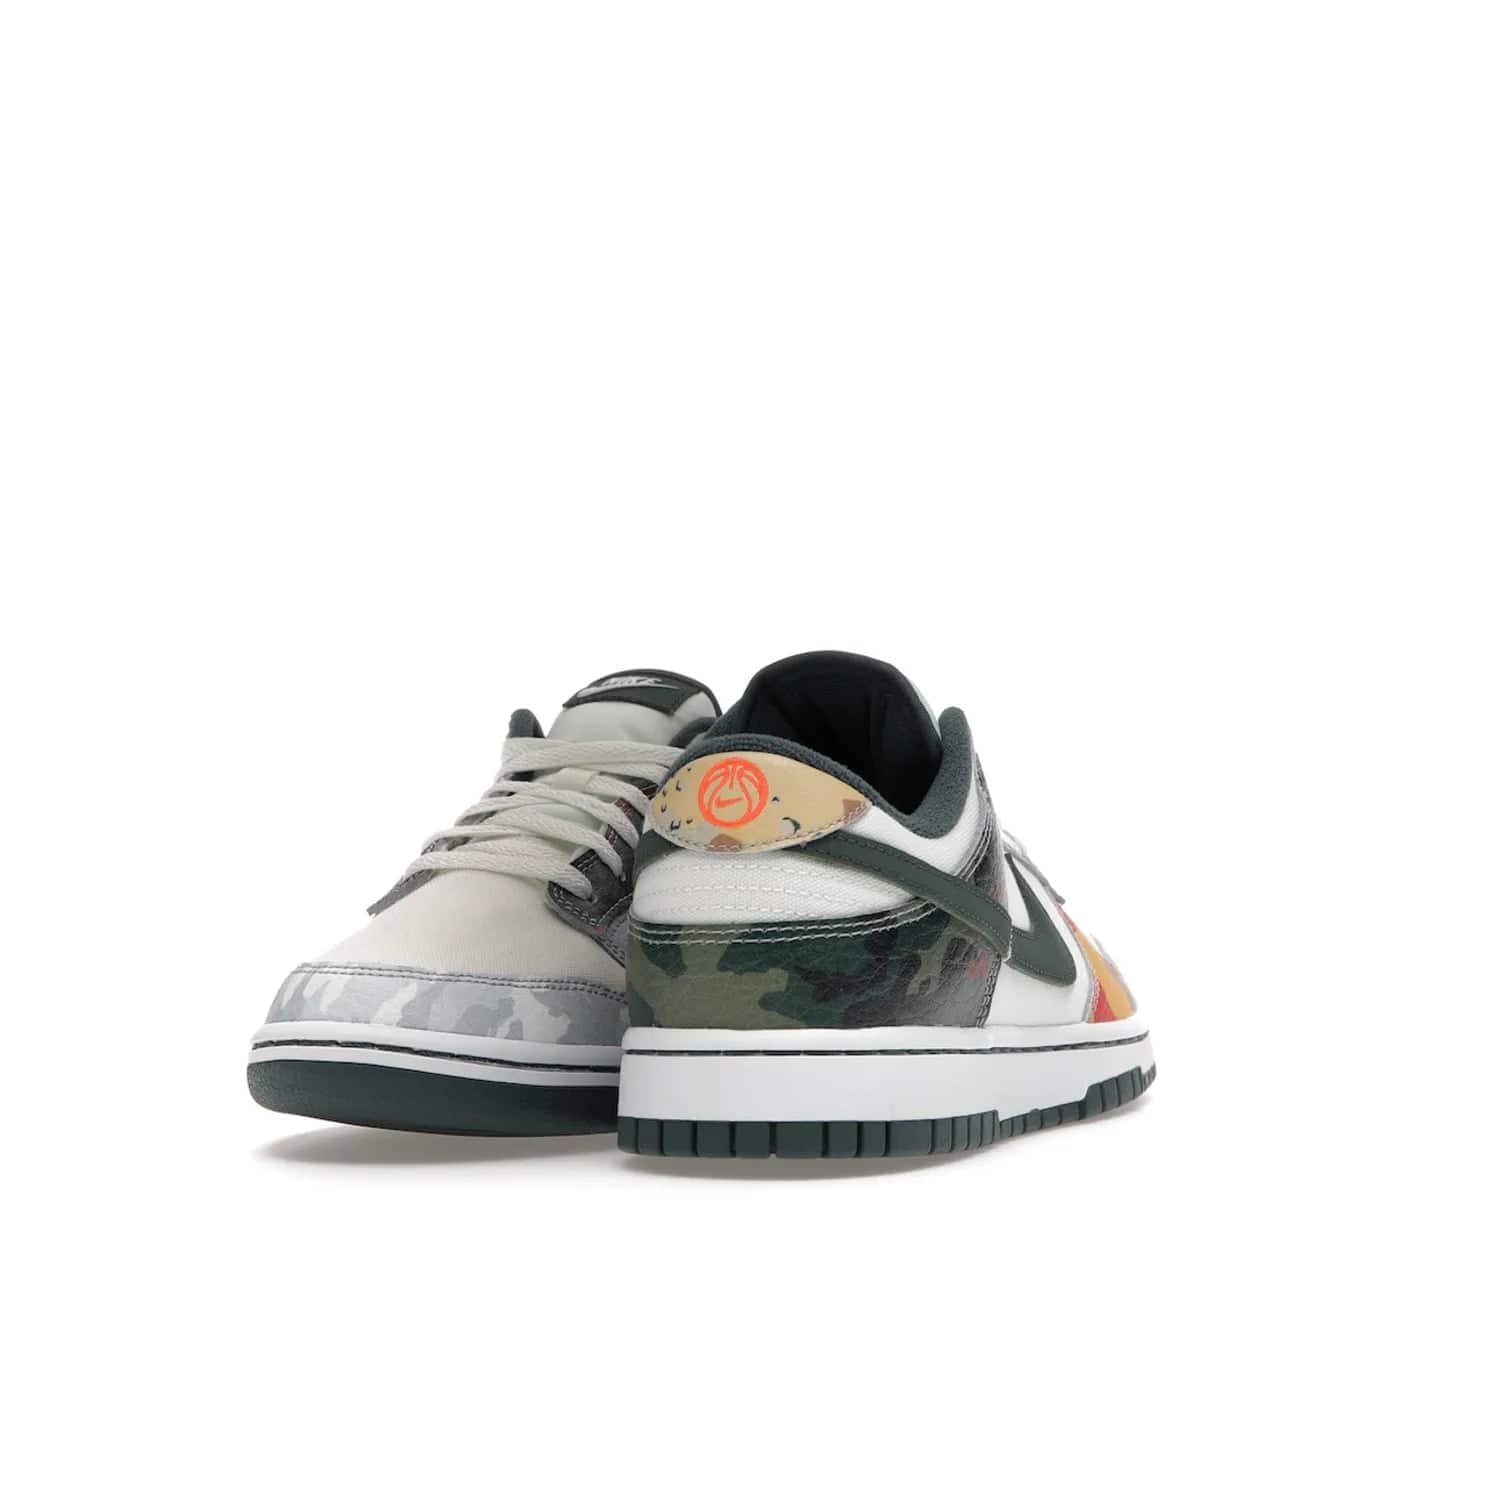 Nike Dunk Low SE Sail Multi-Camo - Image 30 - Only at www.BallersClubKickz.com - Classic design meets statement style in the Nike Dunk Low SE Sail Multi-Camo. White leather base with multi-color camo overlays, vibrant Nike Swooshes, and orange Nike embroidery. Get yours August 2021.